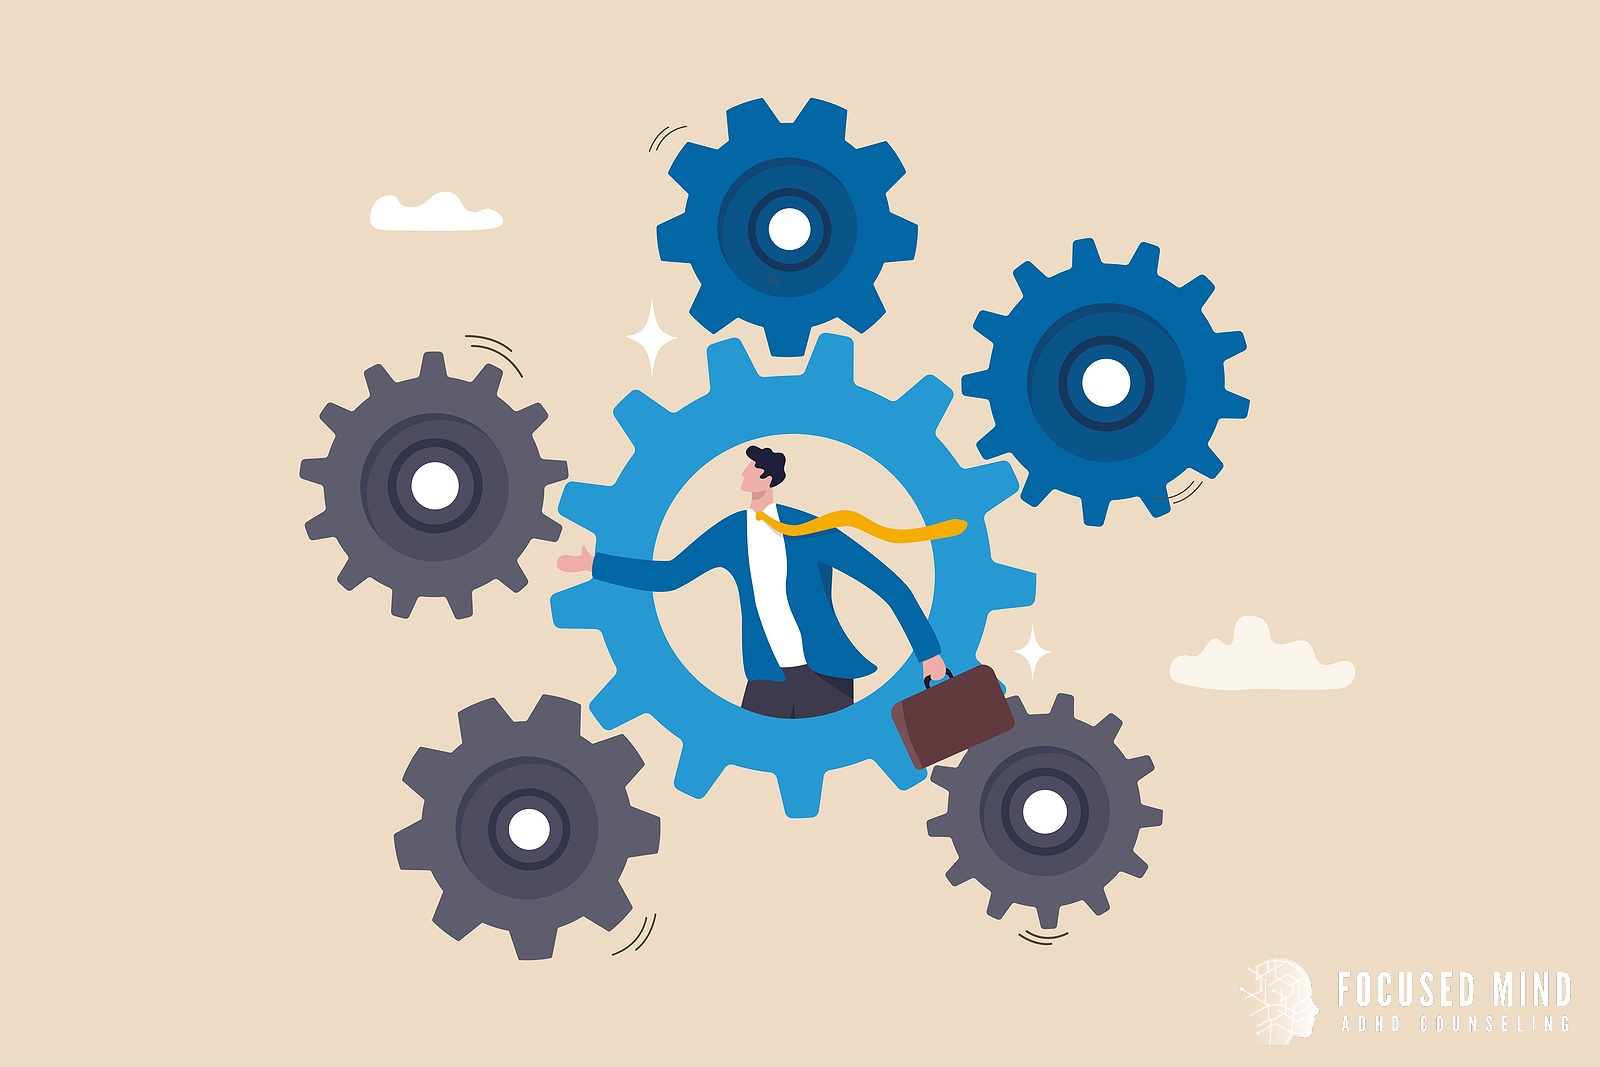 A graphic of a person with a briefcase surrounded by cogs. This could symbolize how learning new ADHD productivity hacks can offer support in overcoming ADHD thought loops and procrastination. Contact an ADHD therapist for adults near me to learn more about ADHD treatment for adults in Ohio today.